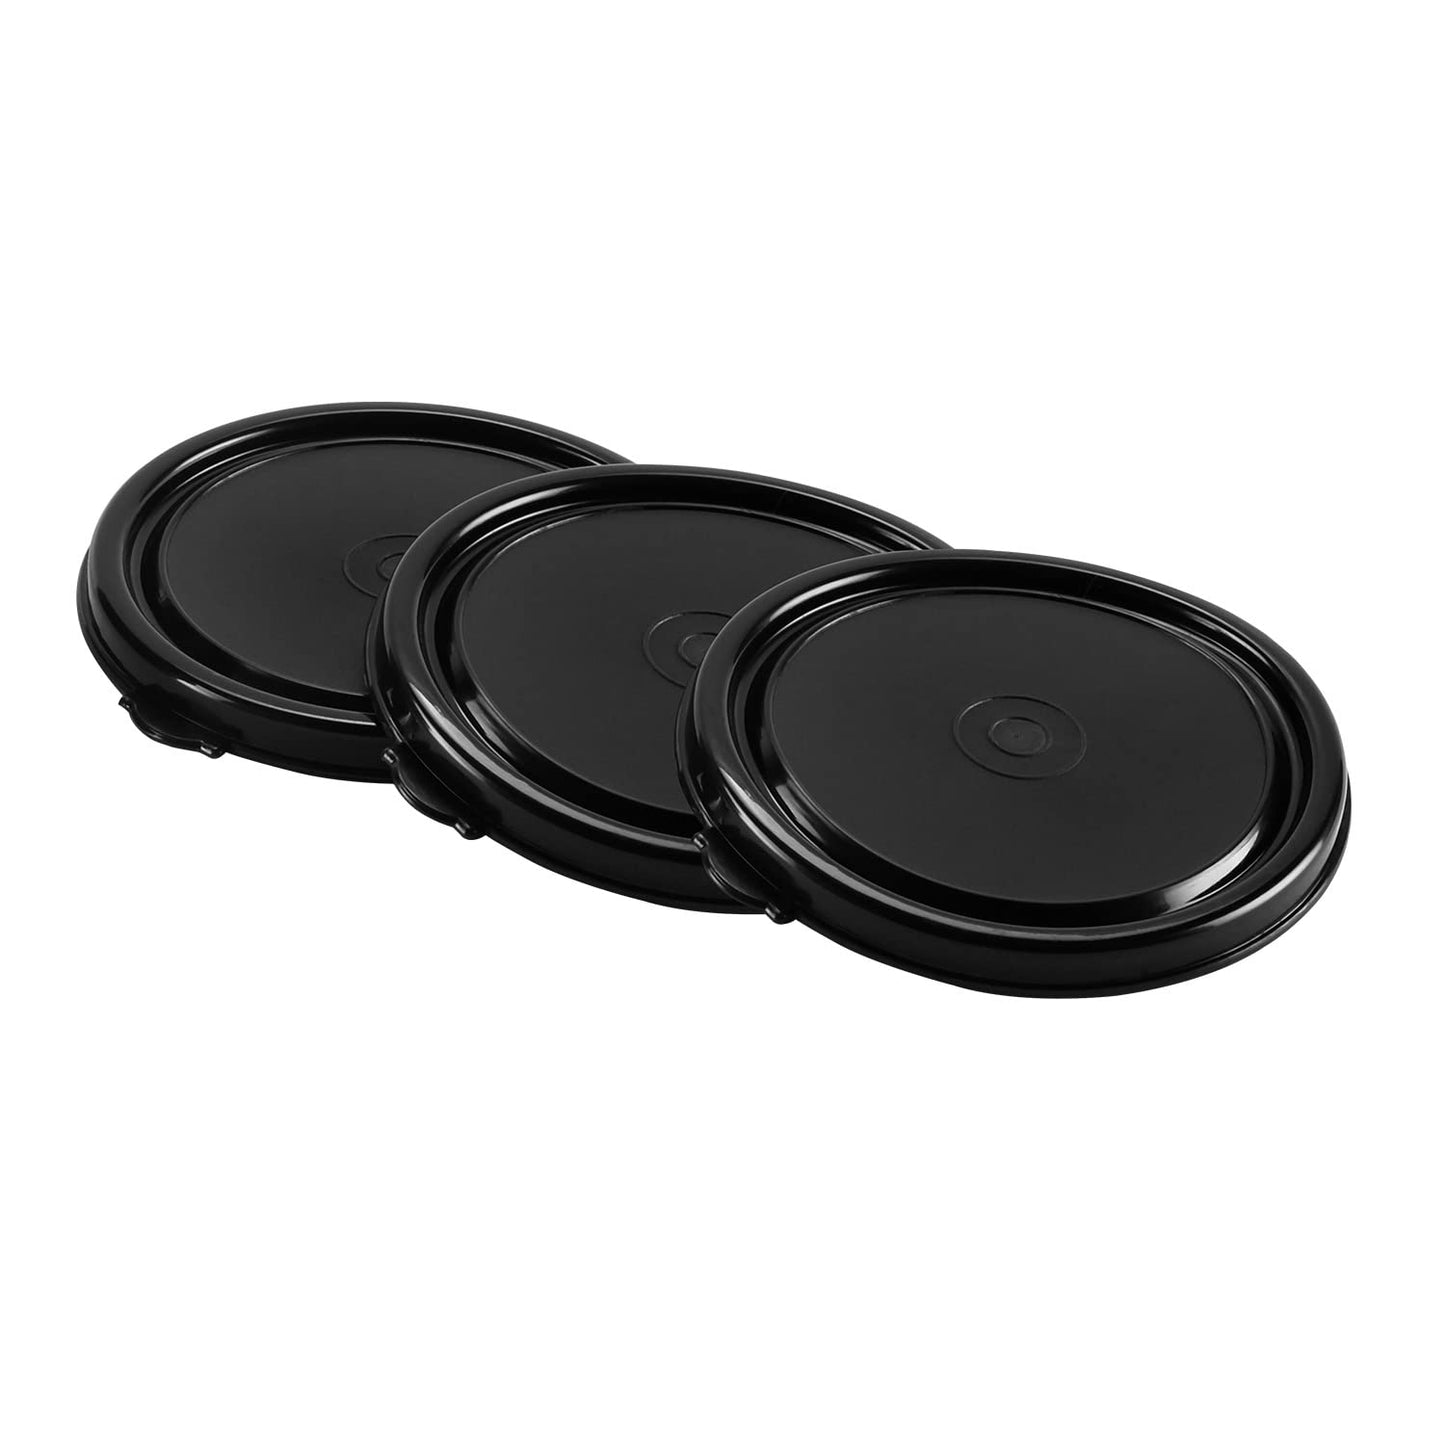 Air Tight Lids for Benny Container